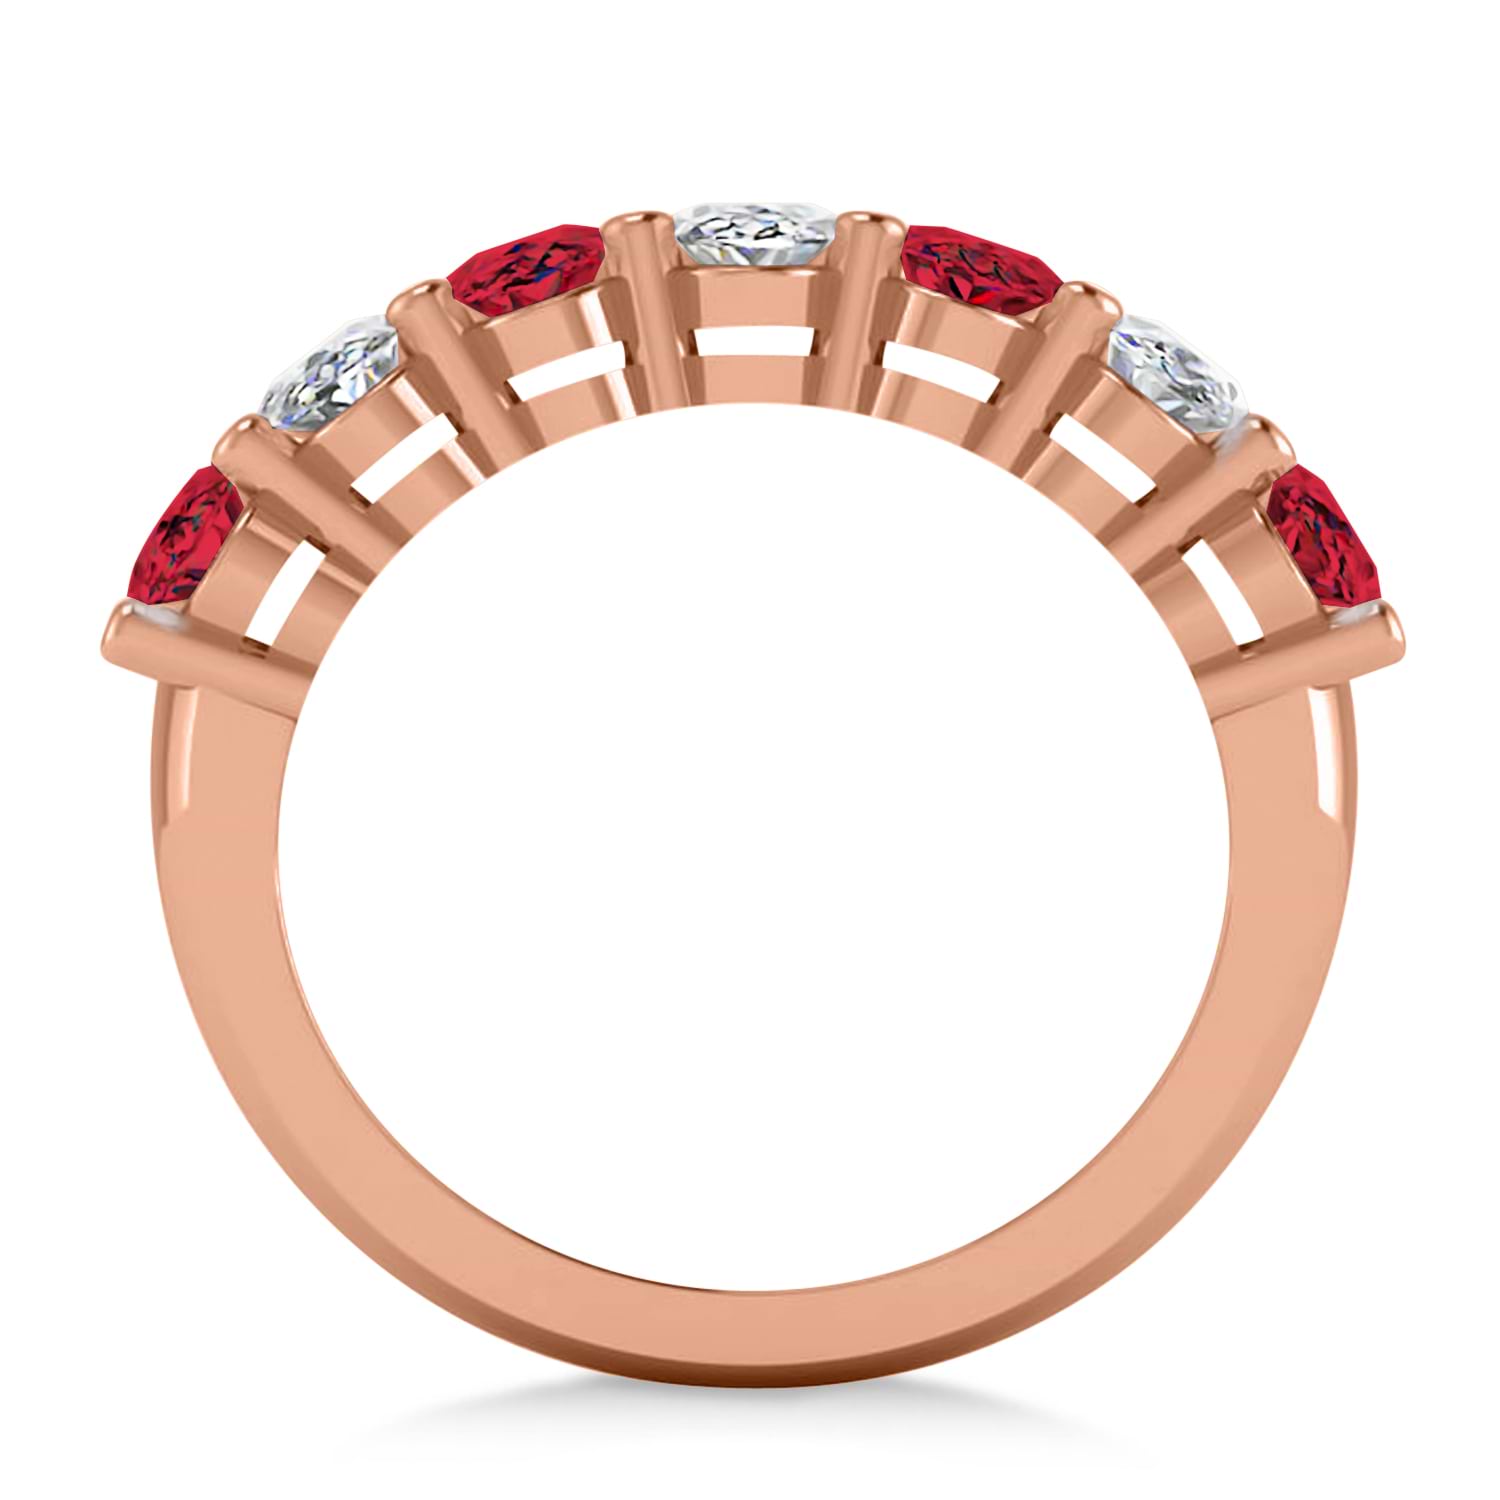 Oval Diamond & Ruby Seven Stone Ring 14k Rose Gold (3.90ct)